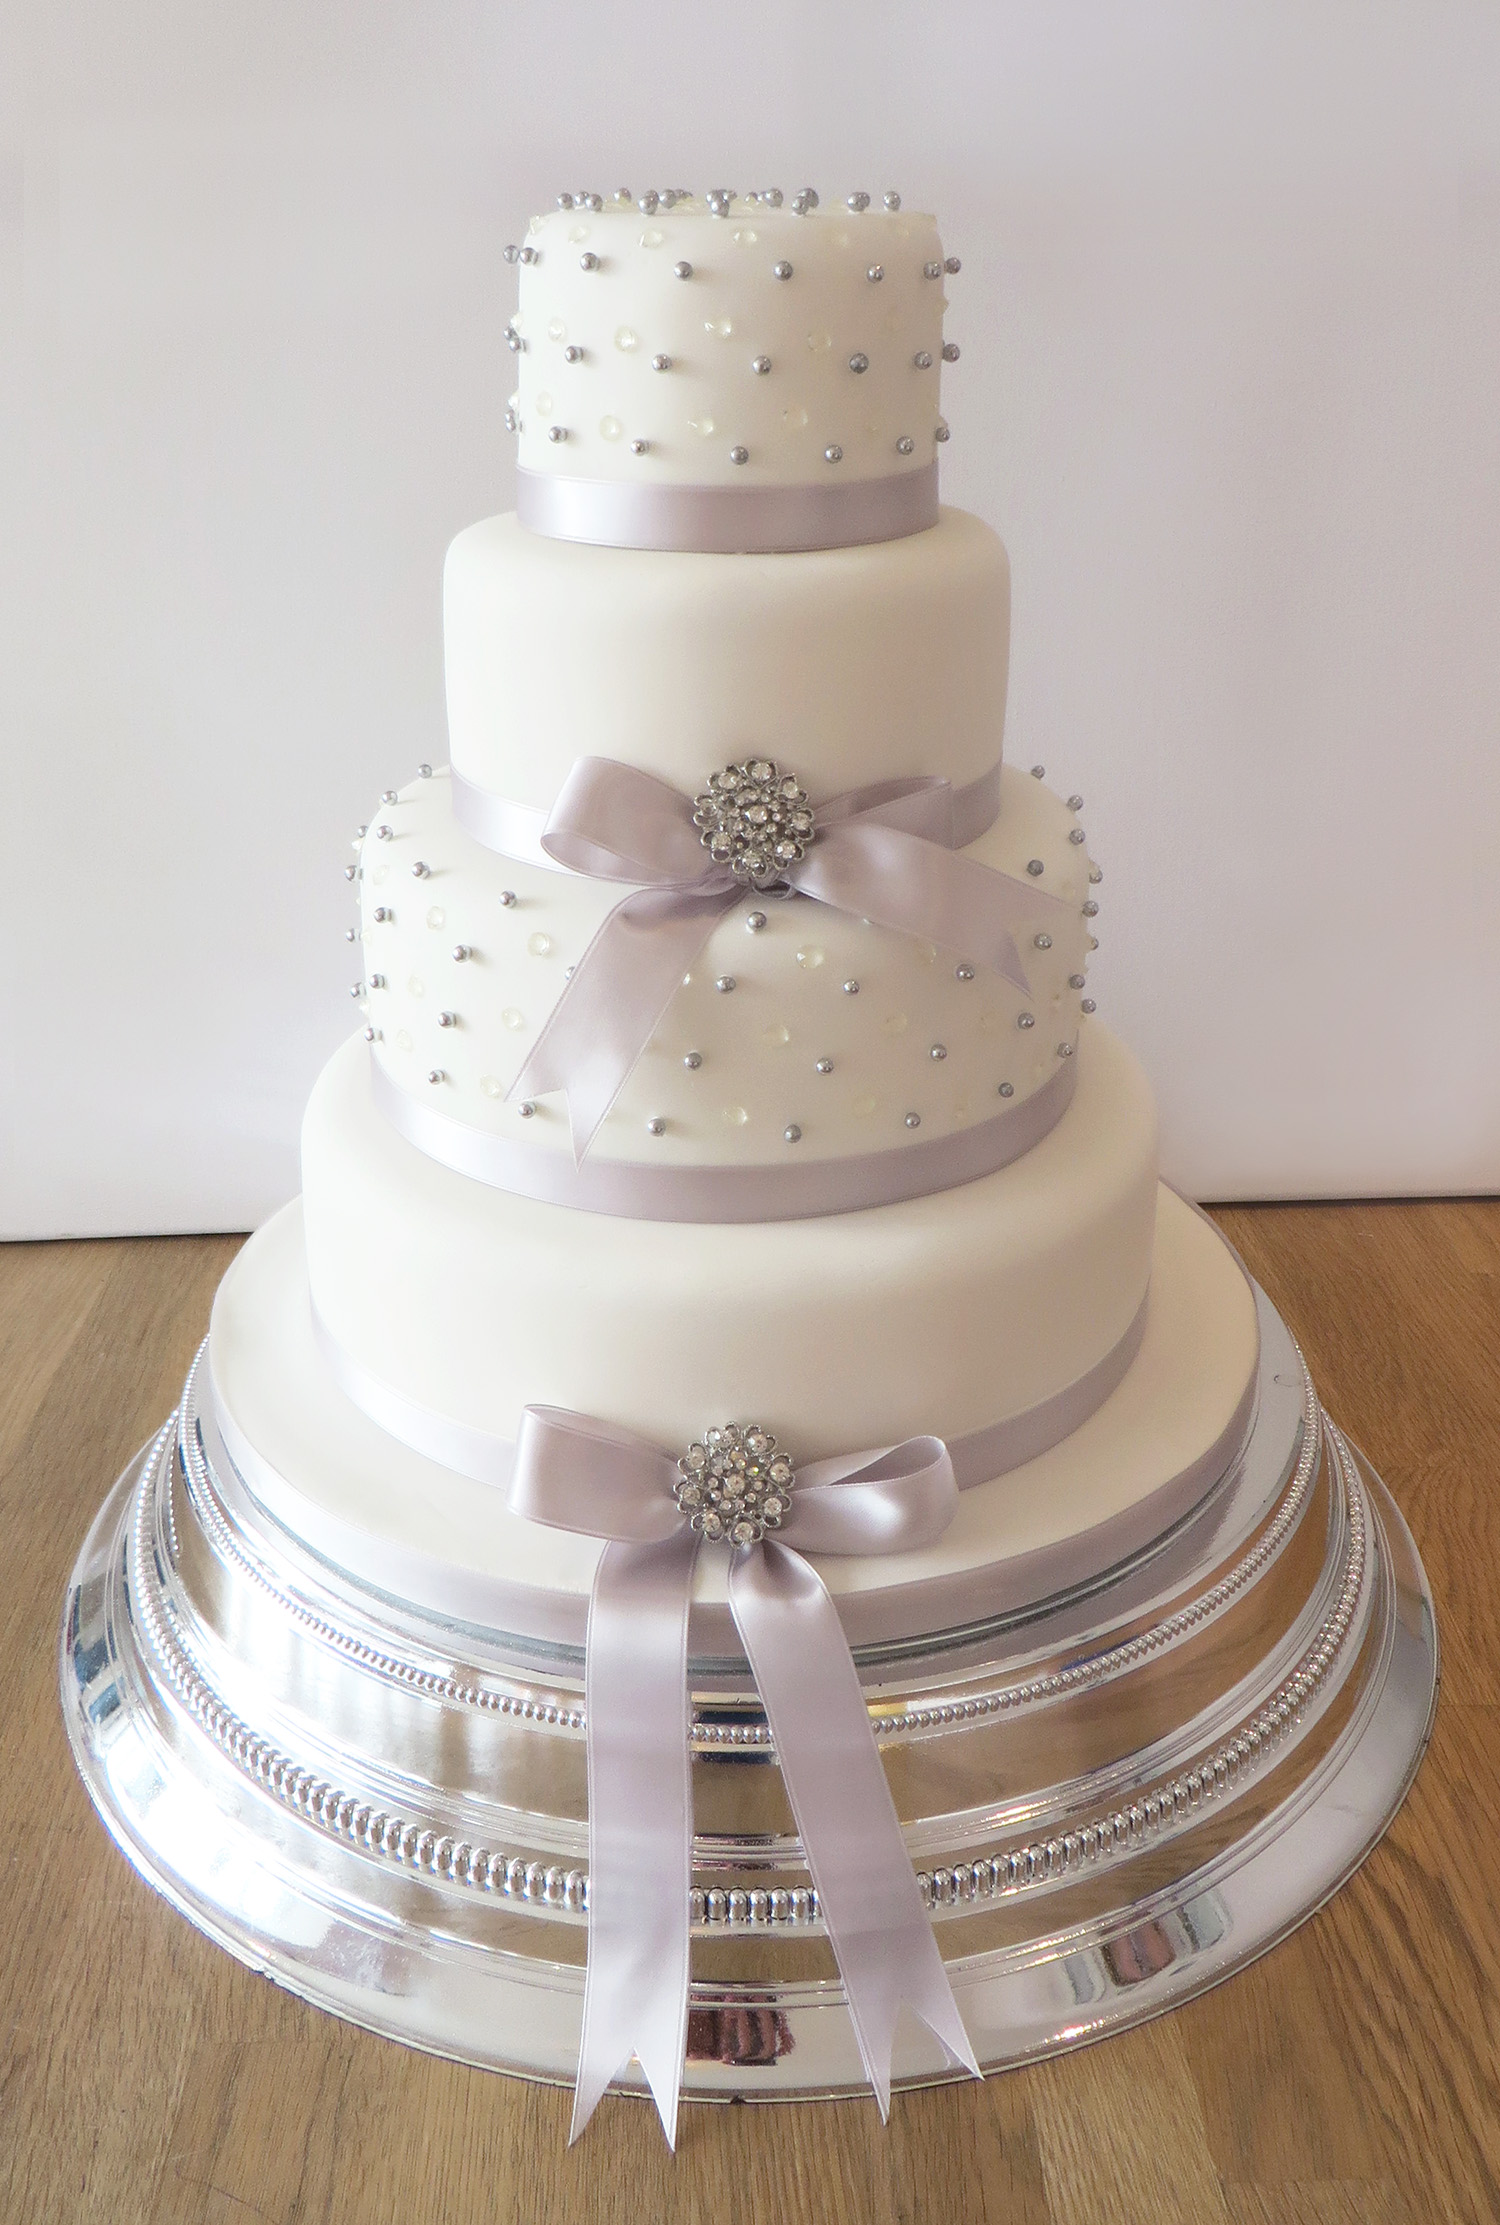 Wedding Cake with Pearls and Ribbon